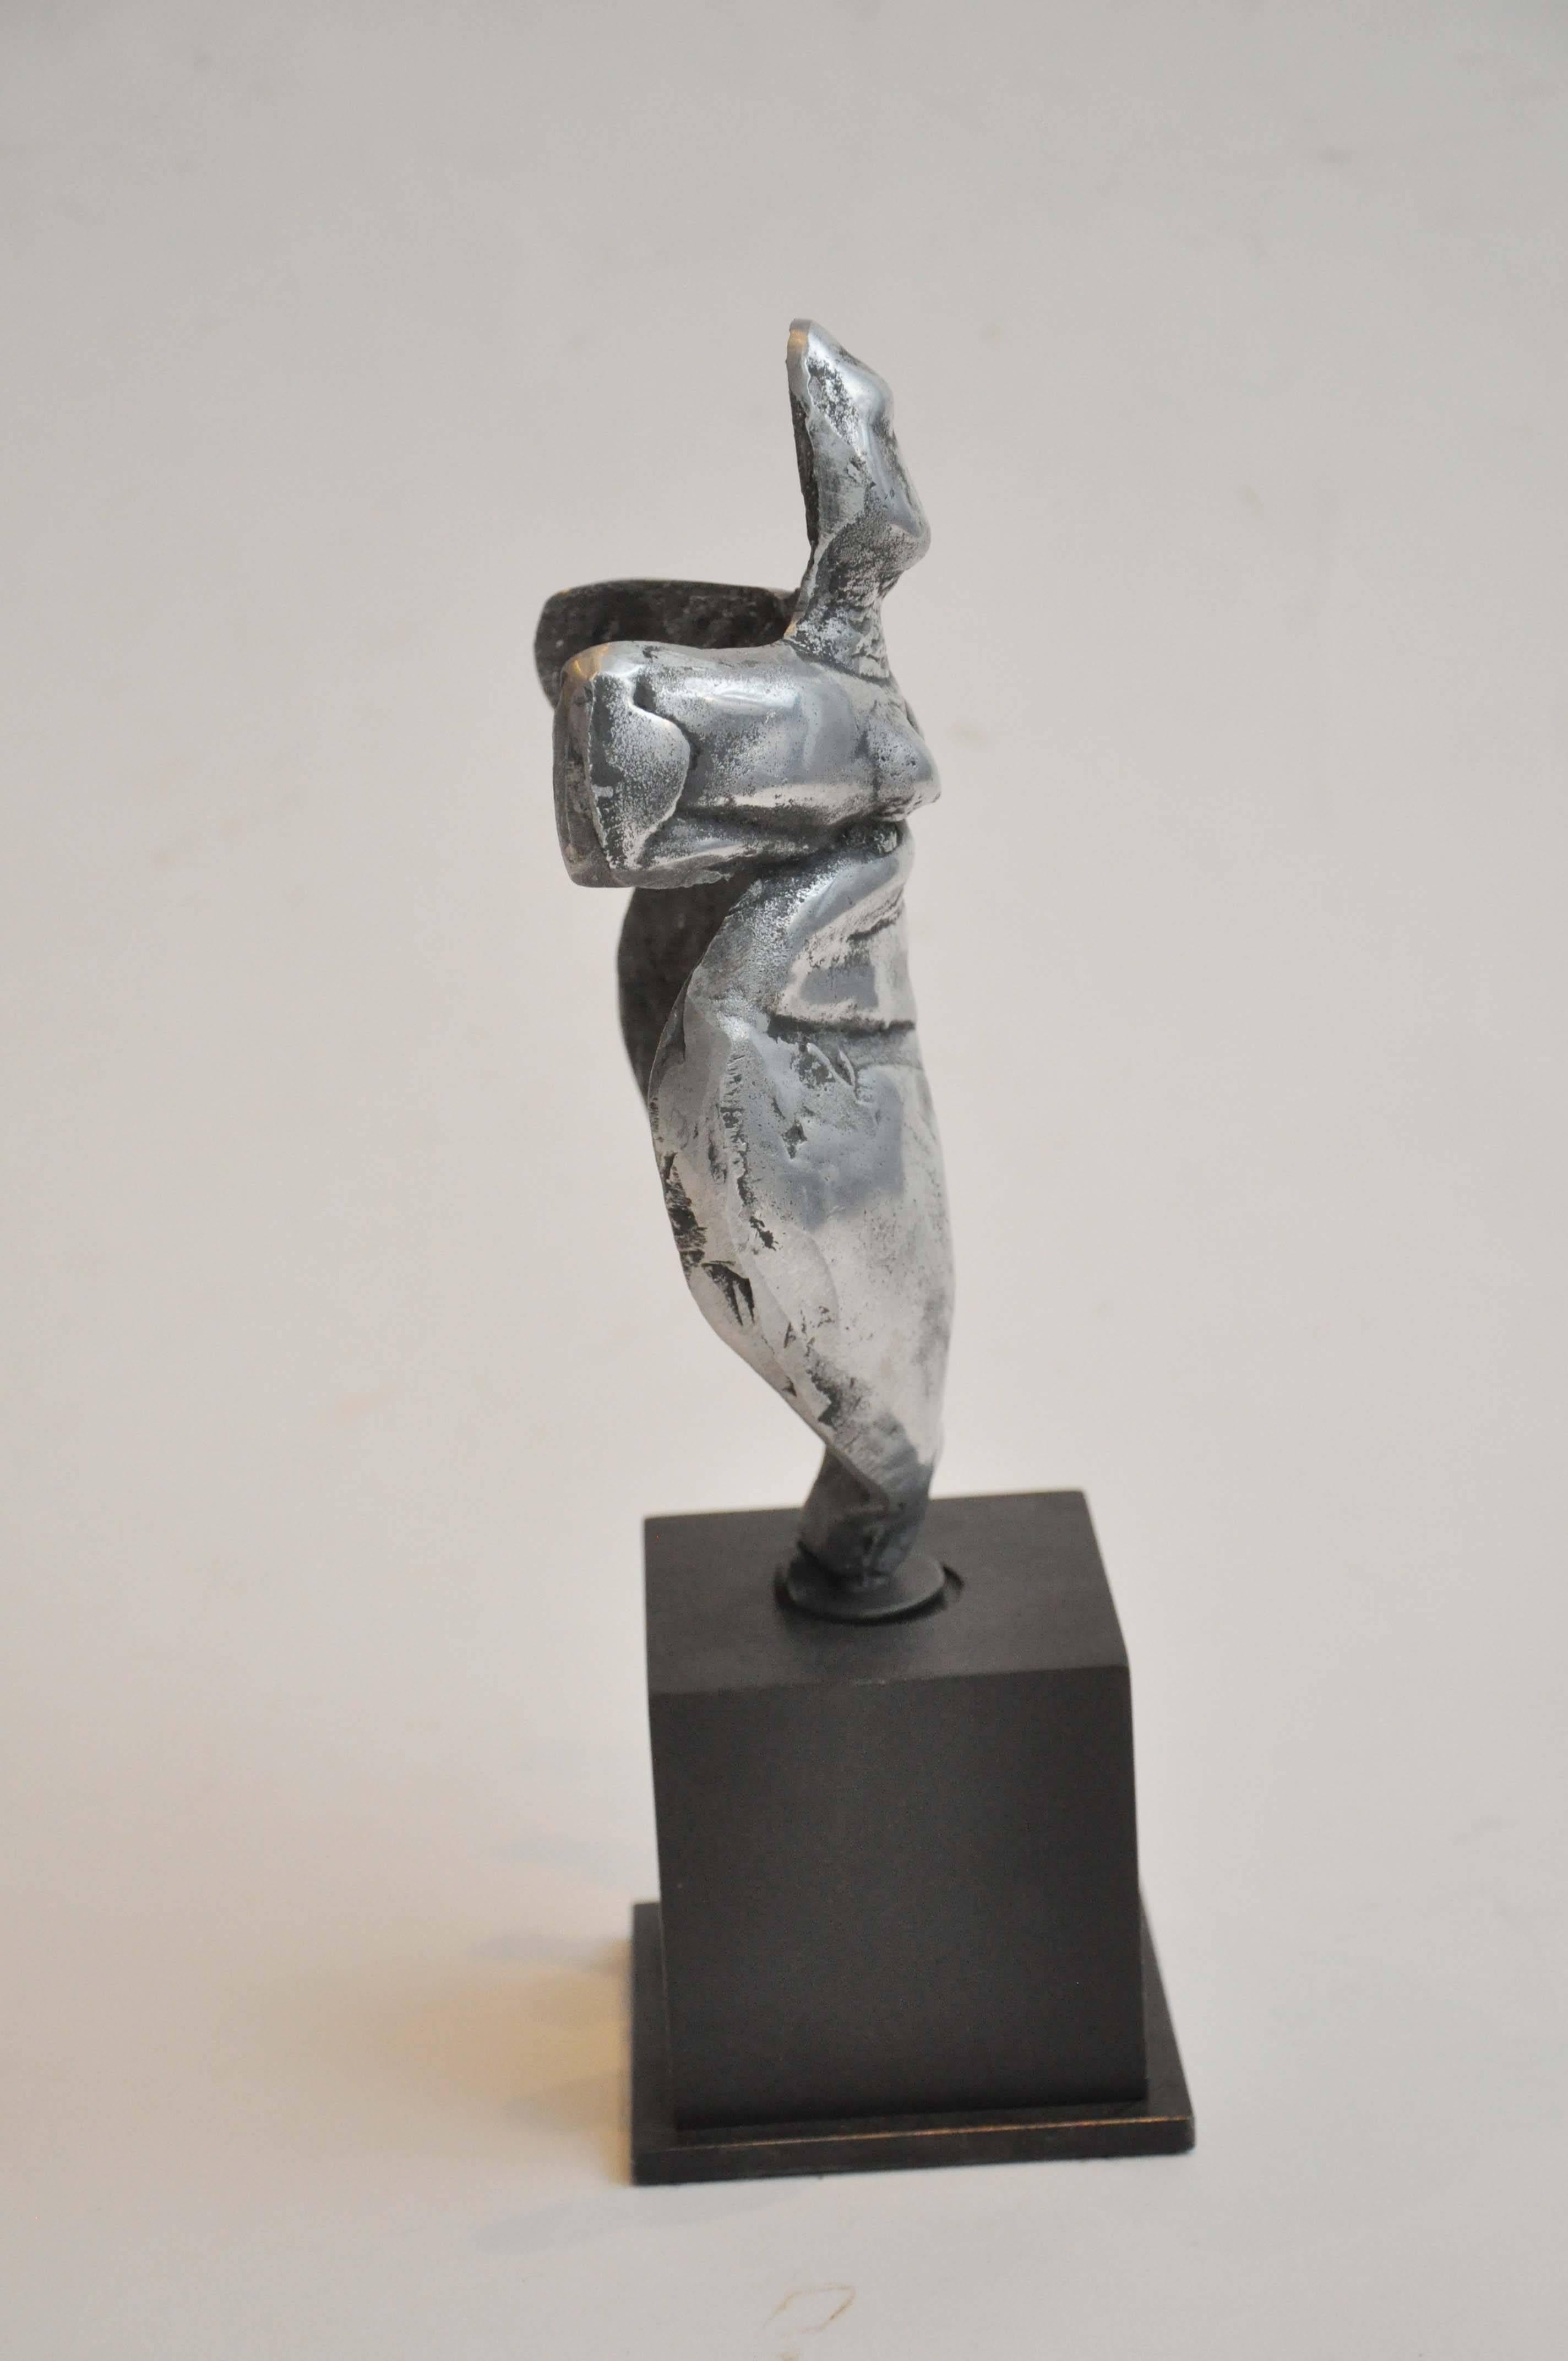 Uruguayan Early 20th Century Small Figural Studio Sculpture in Silver Metal from Uruguay For Sale